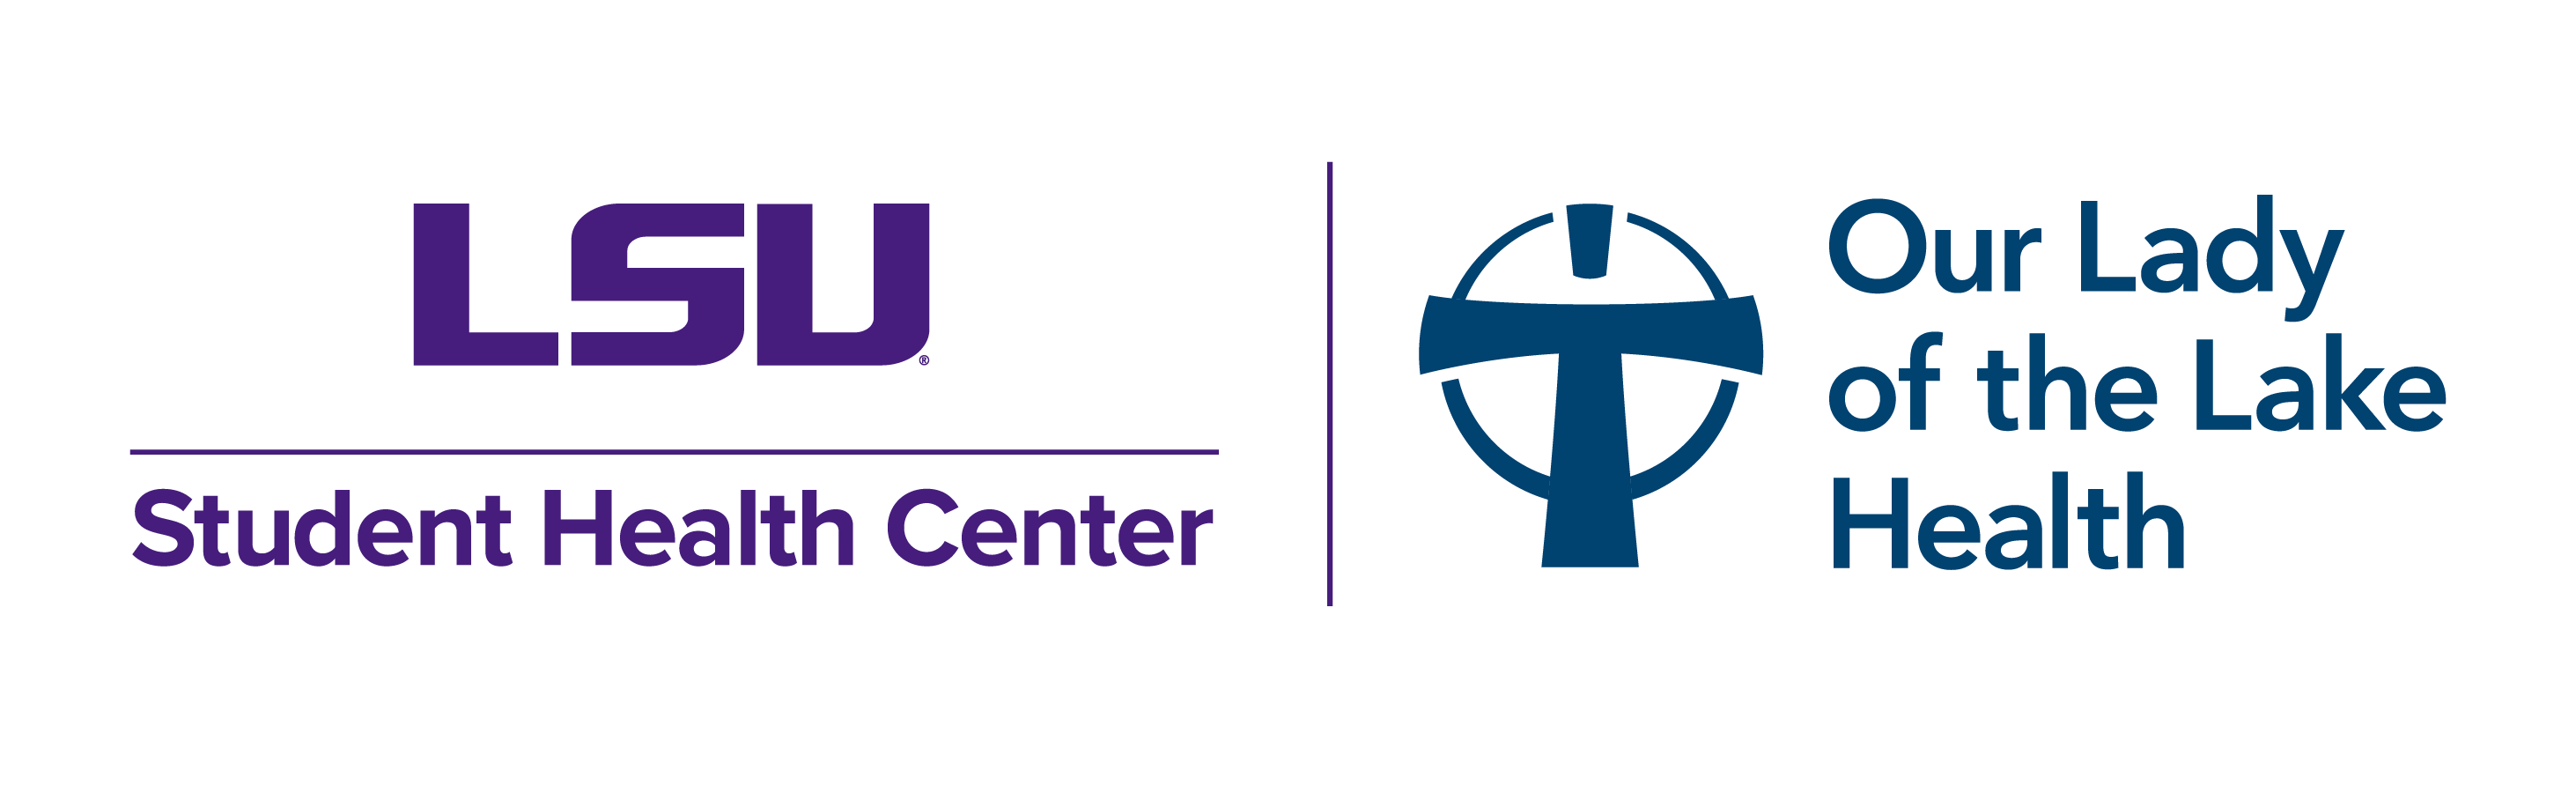 lsu student health center and our lady of the lake health interlocked logo